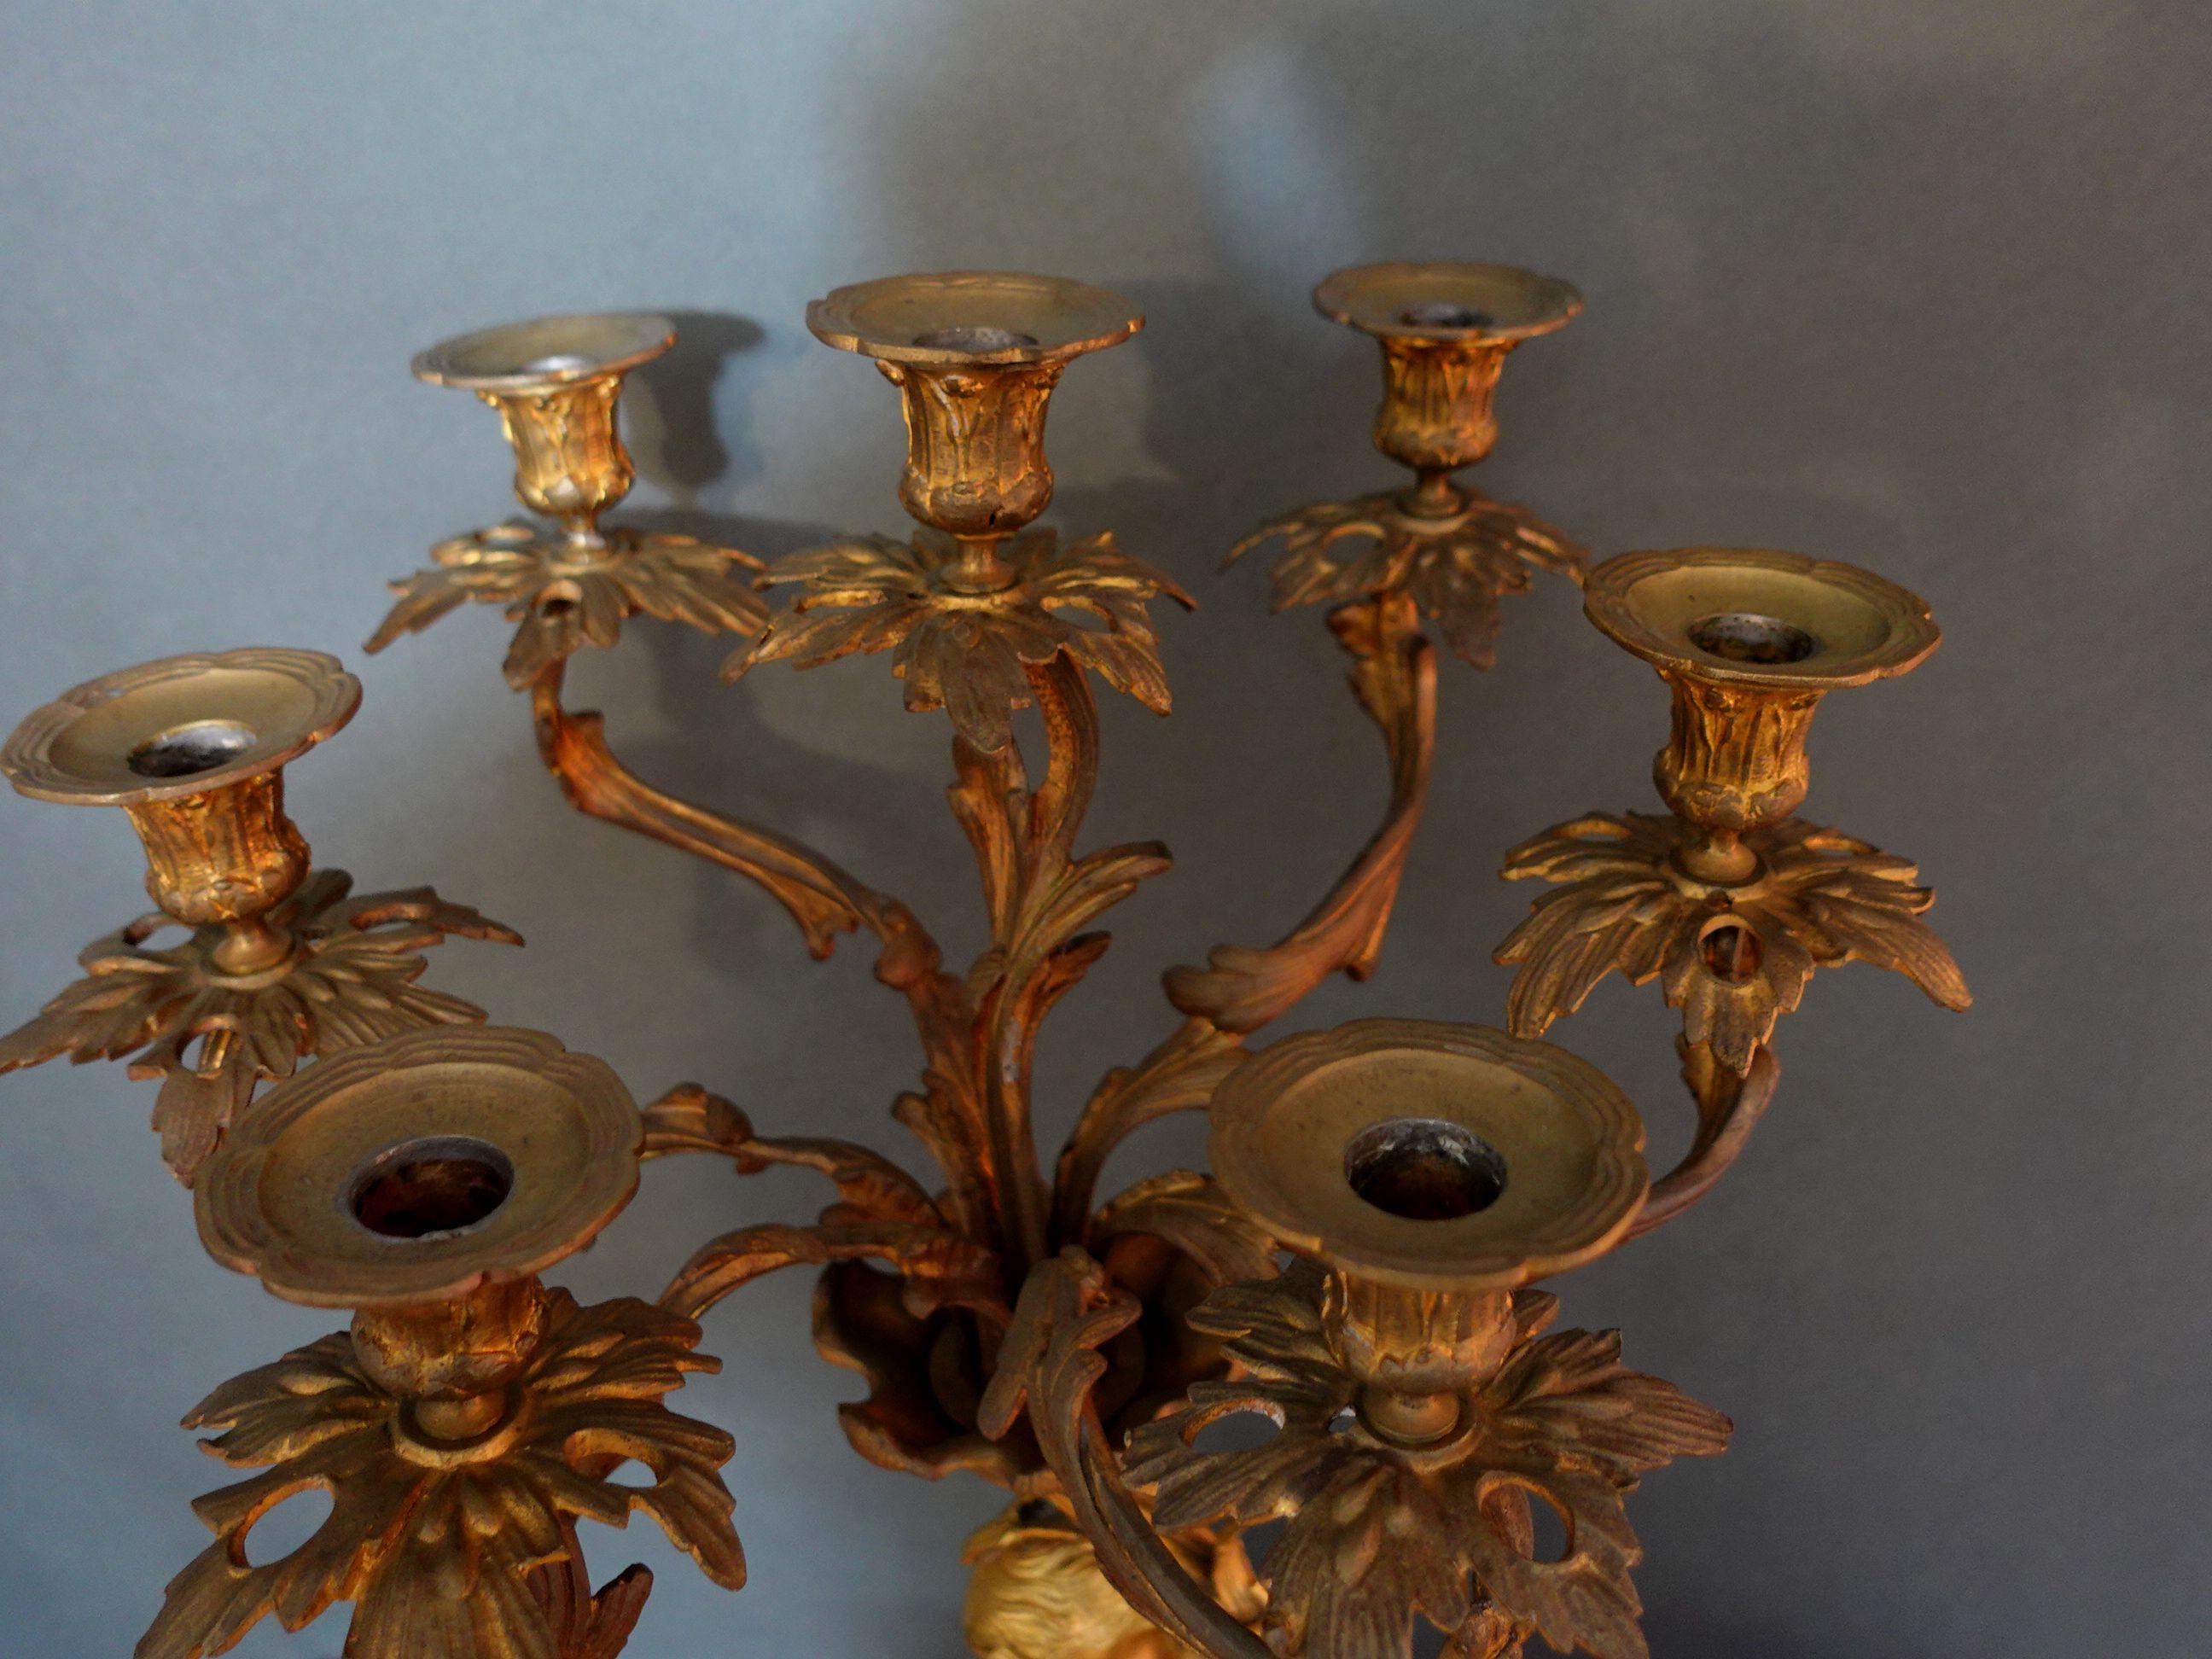 Large 19th Century French Louis XV Bronze Candelabras with seating Putti For Sale 1